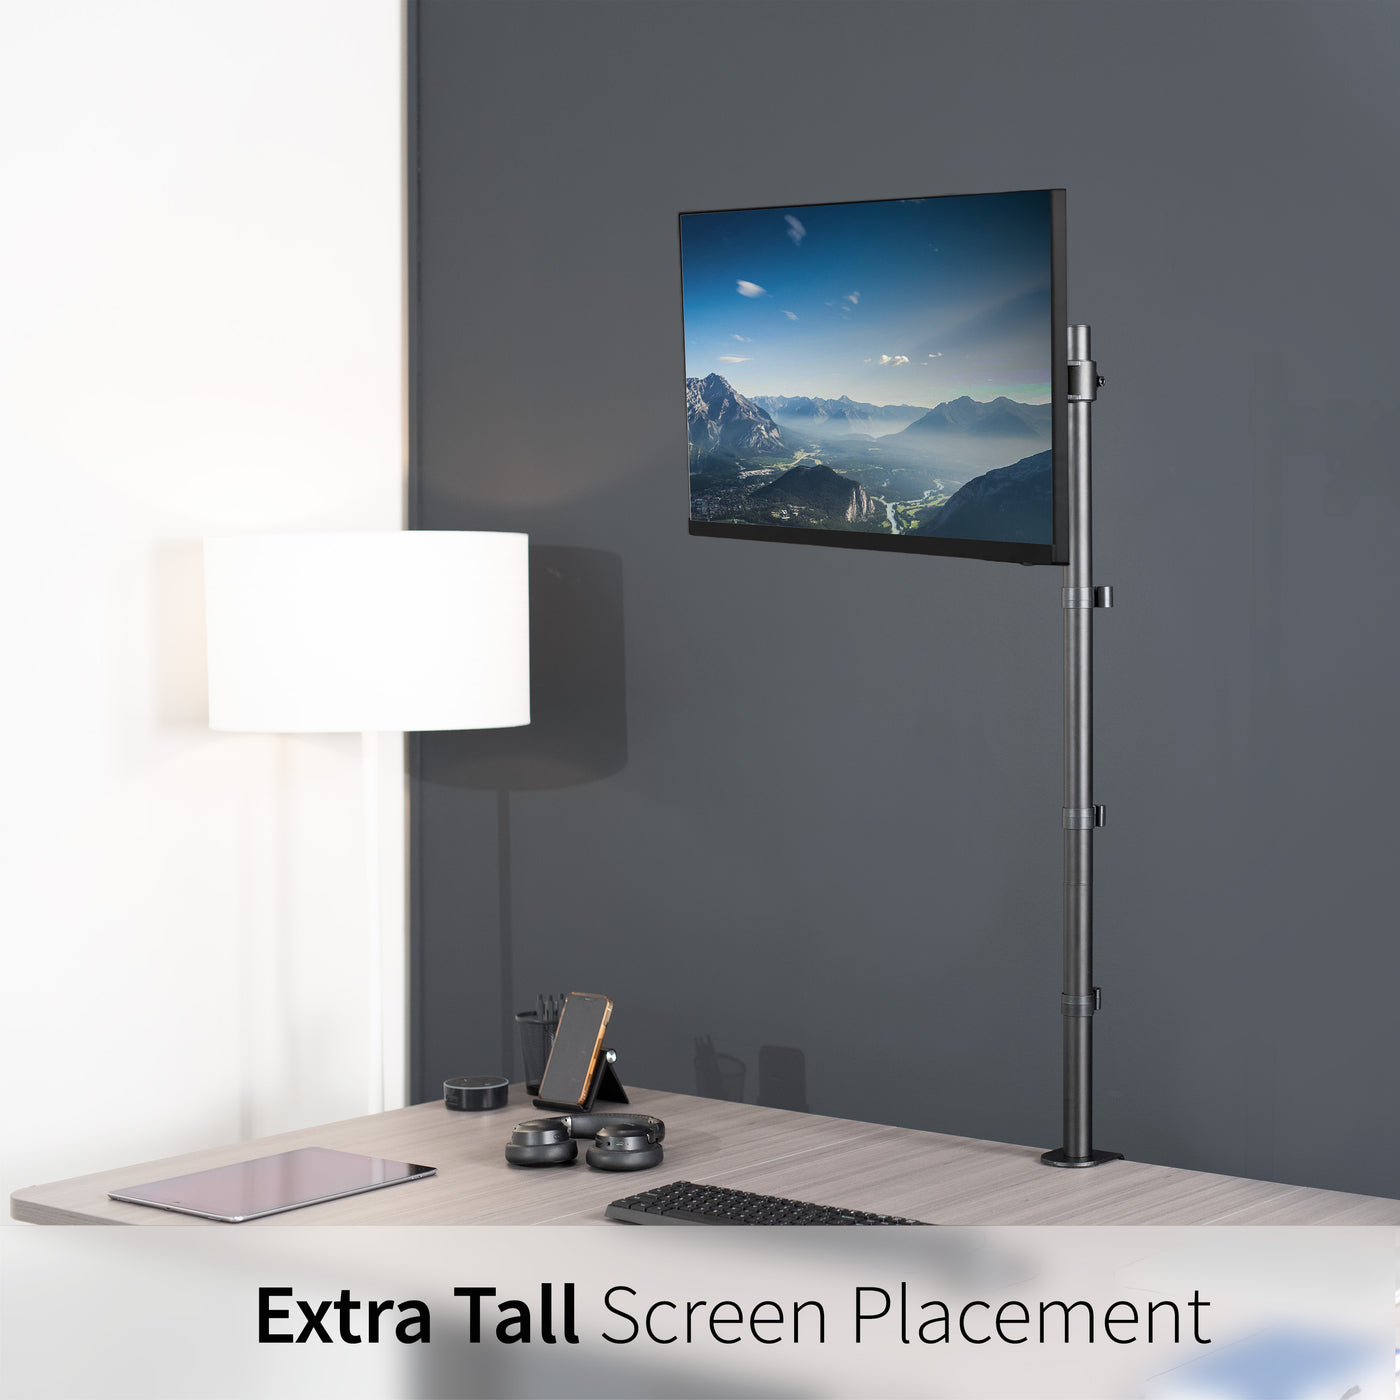 Extra tall desk mount for single monitor provides sit or stand application for the user and tall screen placement.